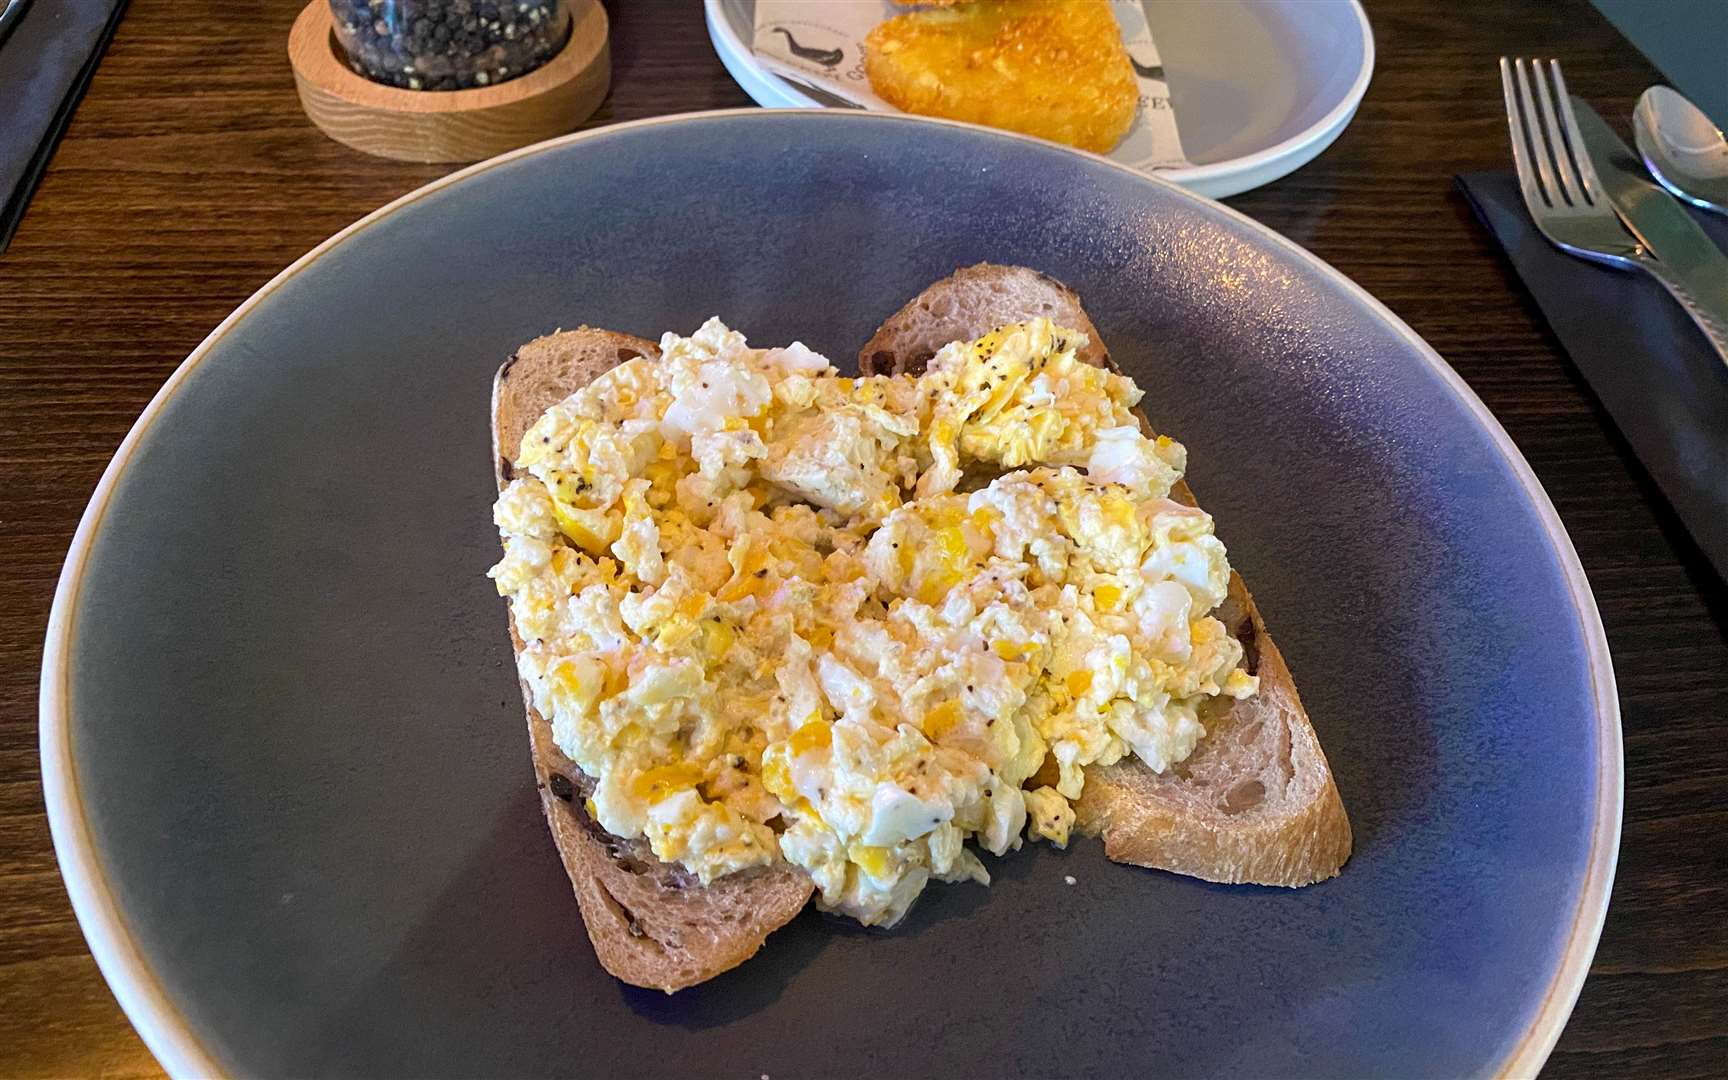 The scrambled eggs didn’t look as exciting, but they tasted much better than my dish